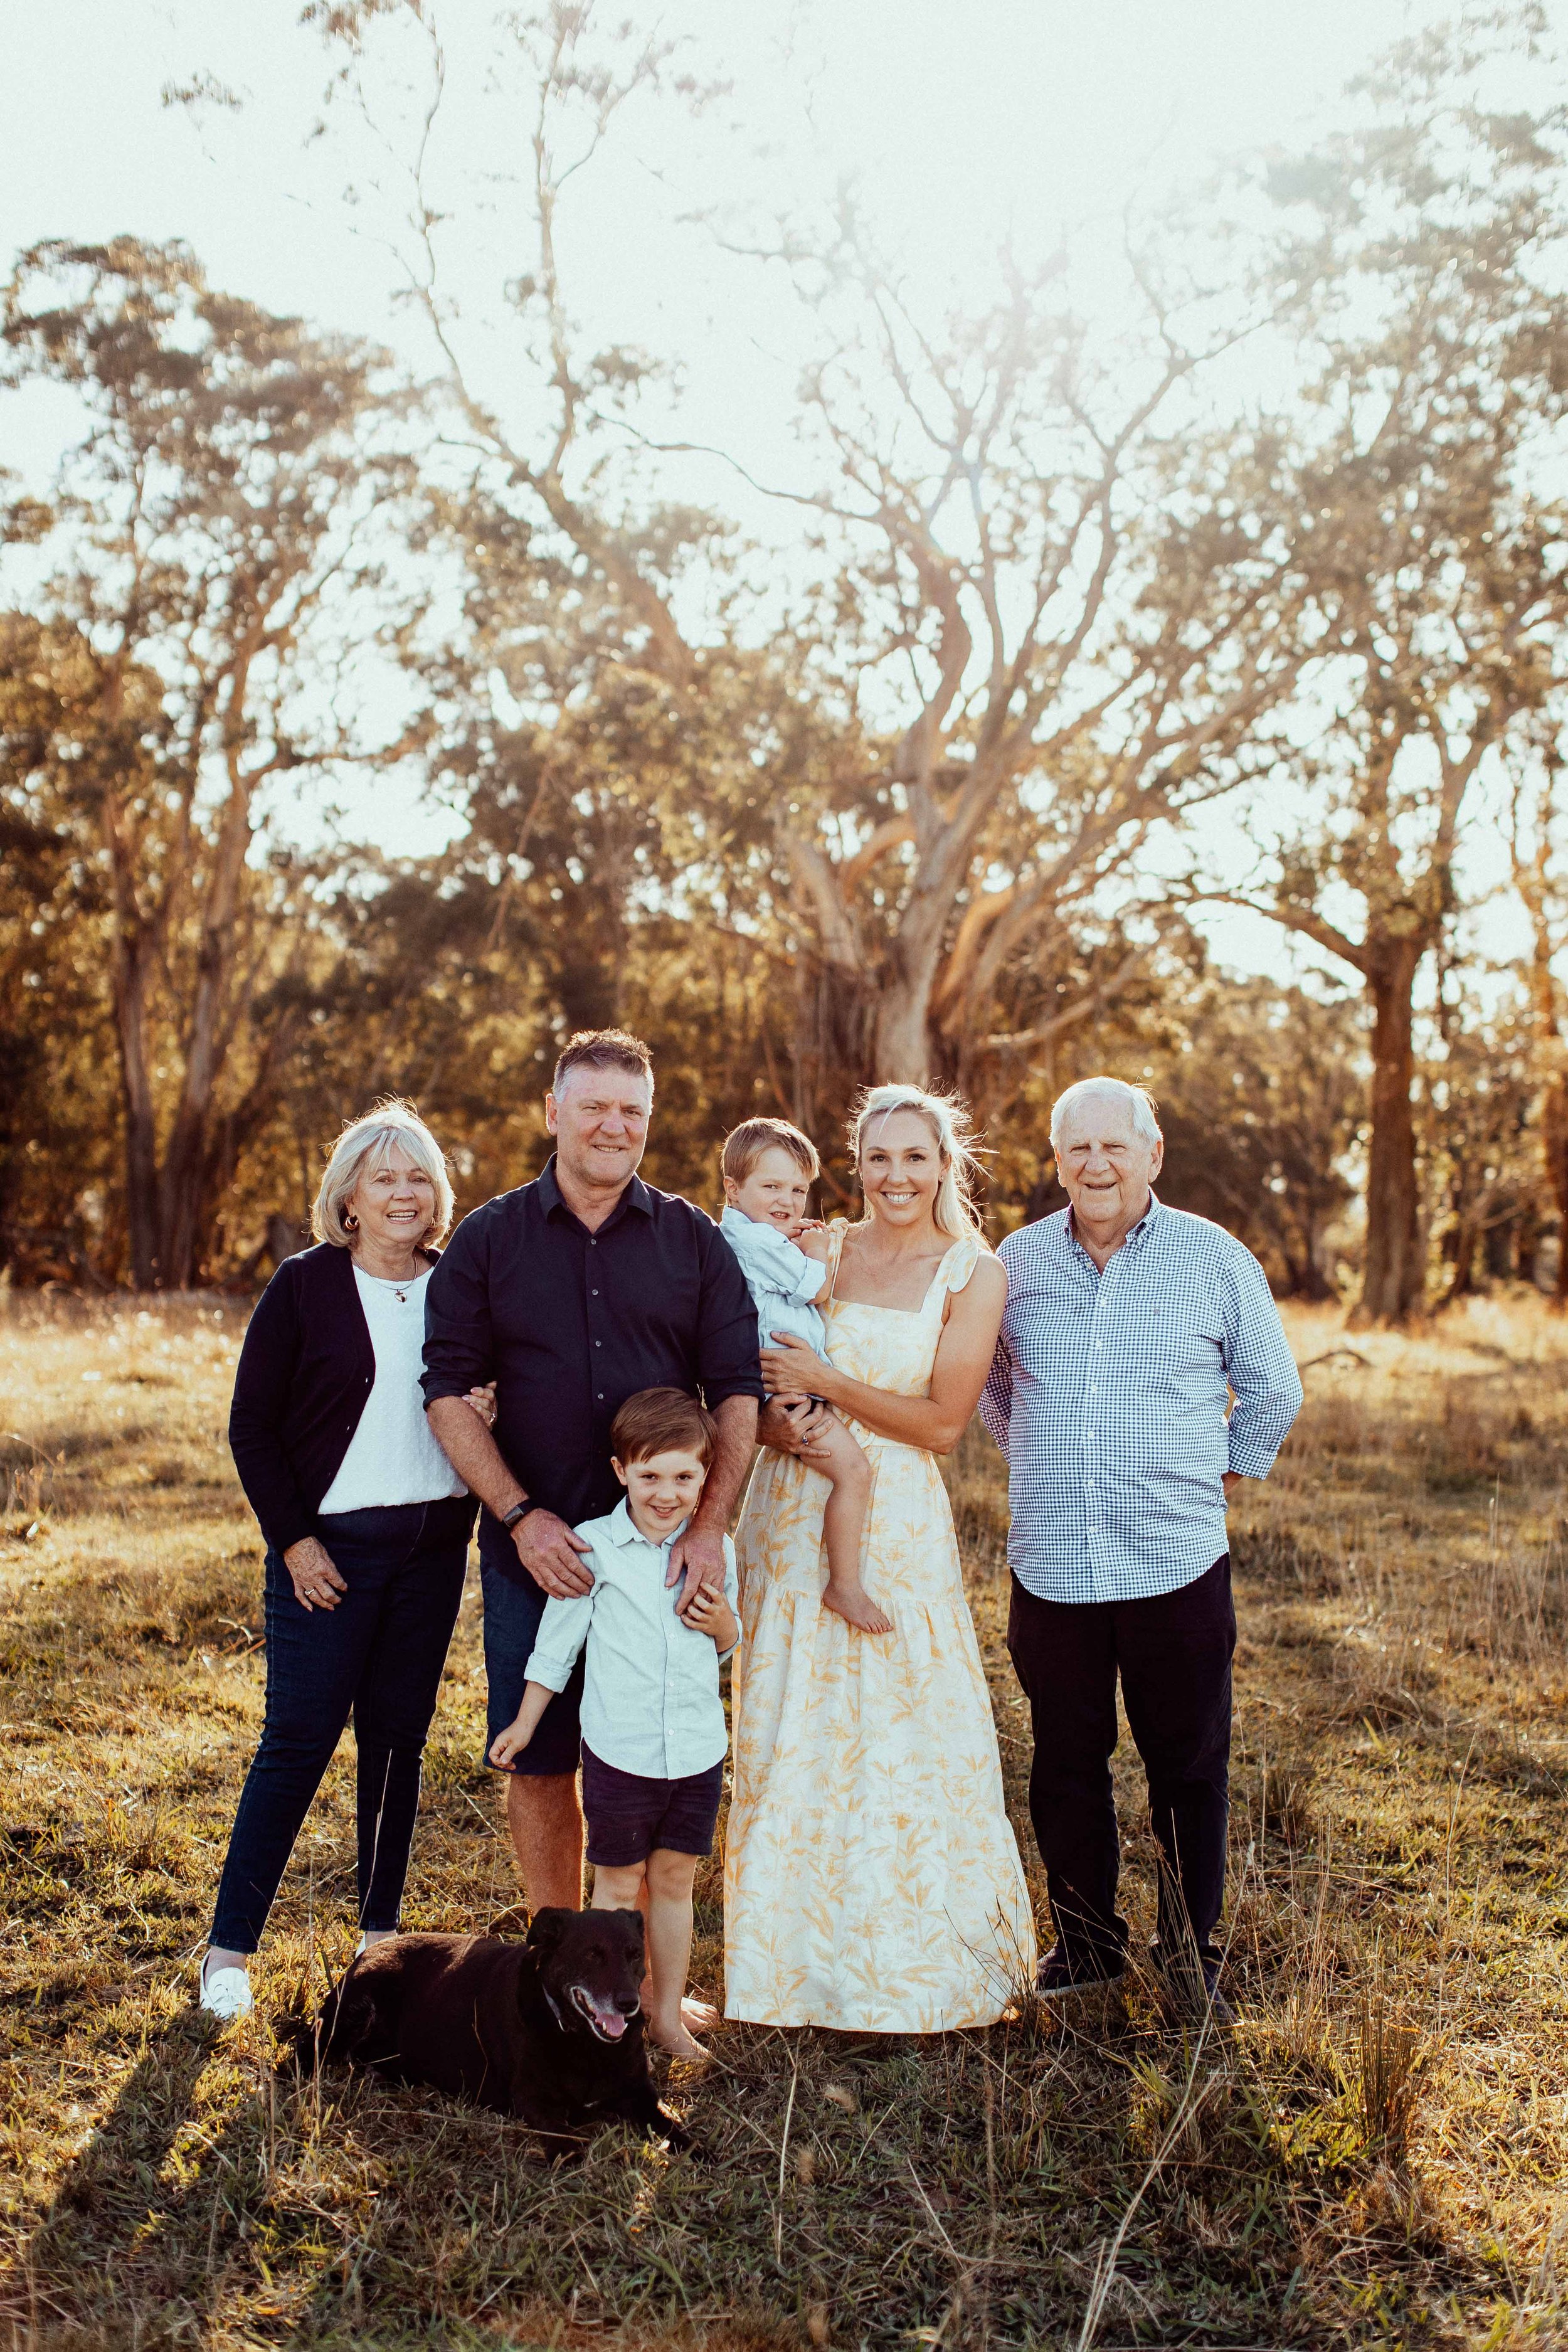 durney-family-exeter-southern-highlands-bowral-inhome-family-lifestyle-wollondilly-camden-macarthur-sydney-photography-www.emilyobrienphotography.net-8.jpg